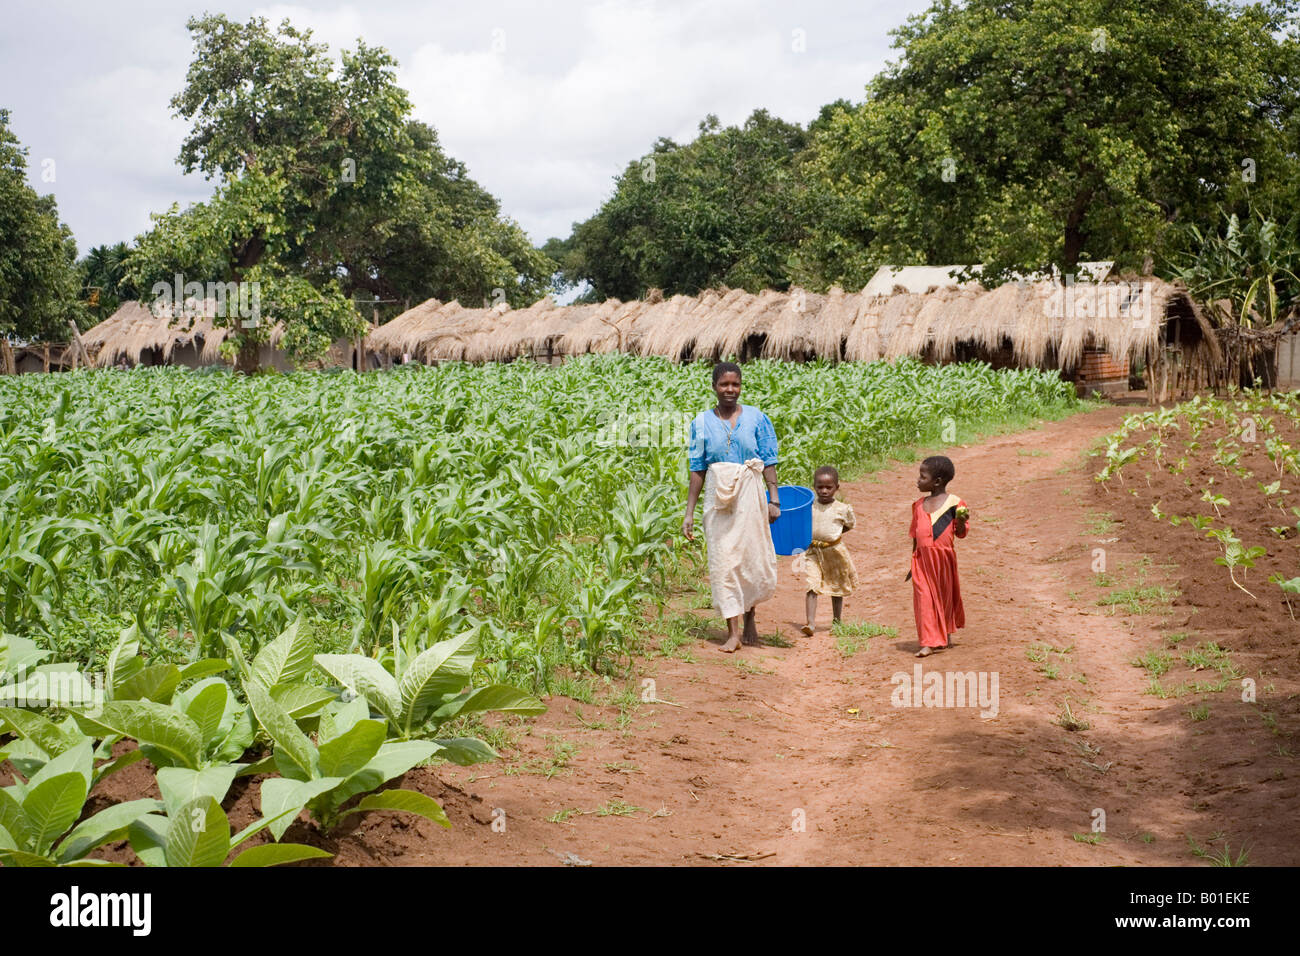 Young tobacco and maize plants growing during the rainy season in the village of Mombala, (Mambala), Malawi, Africa Stock Photo